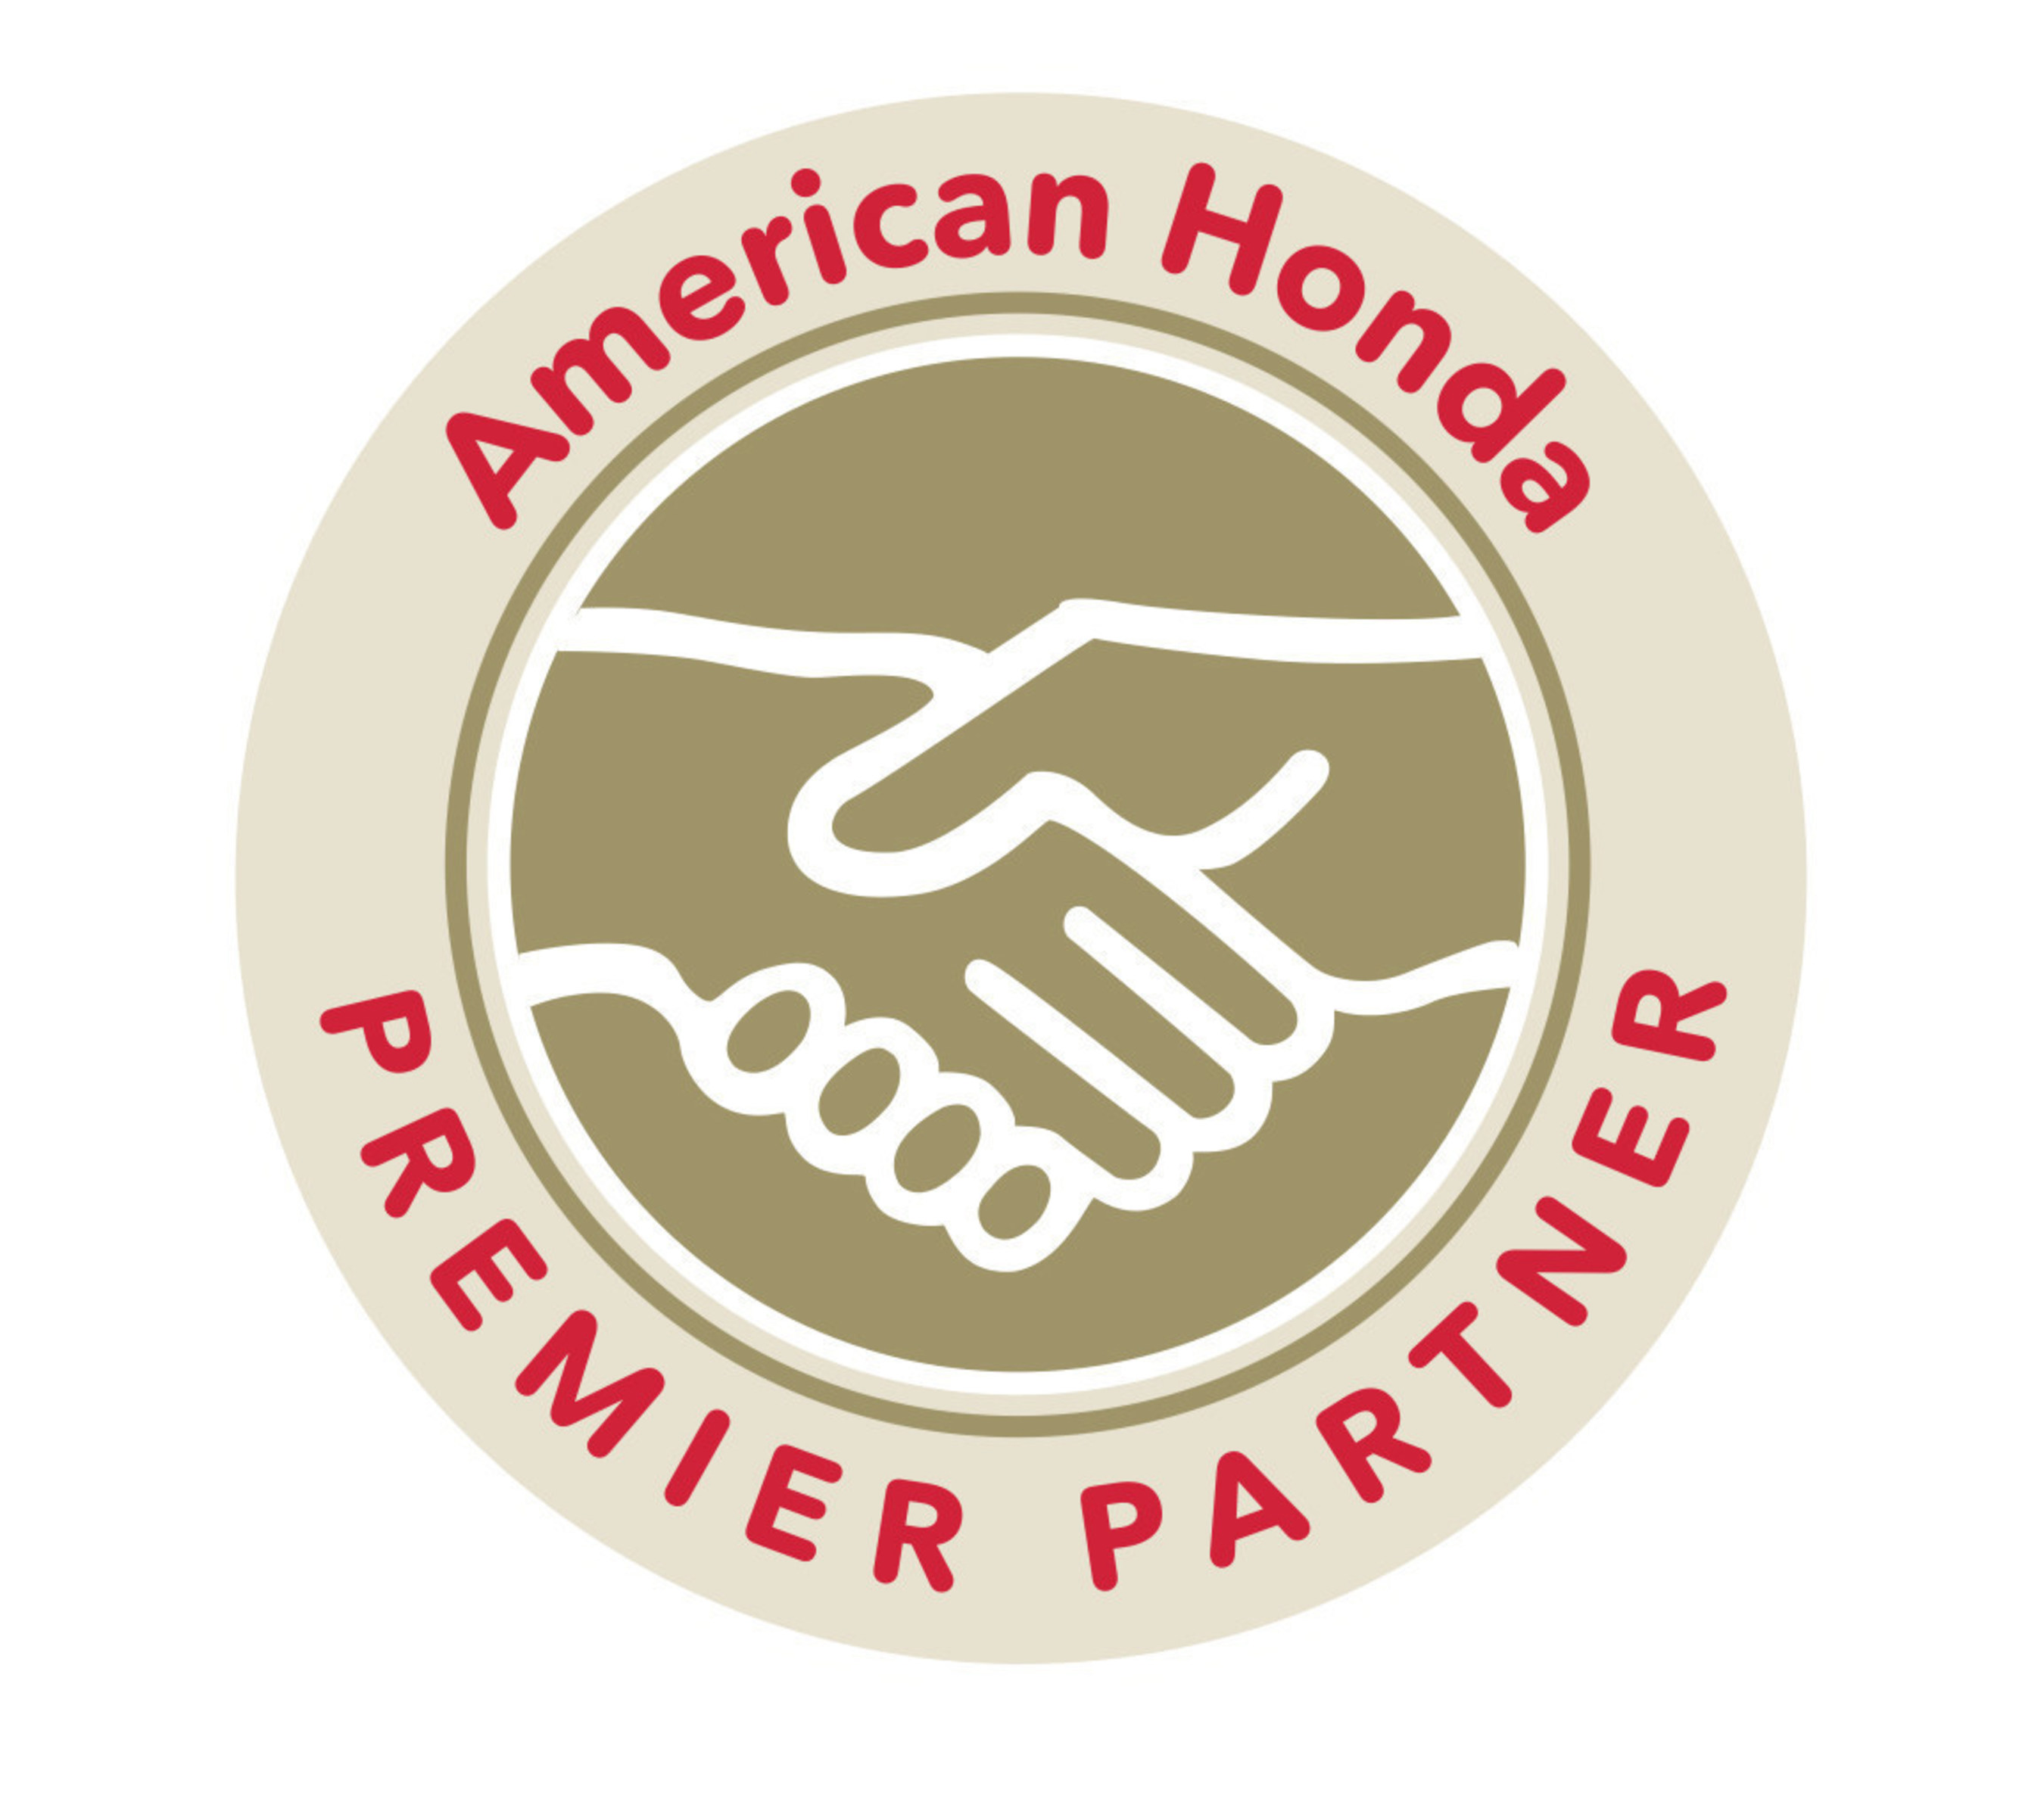 15 top performing American Honda suppliers were selectedfrom a pool of more than 1,000 eligible companies based on excellence inquality, value and customer service